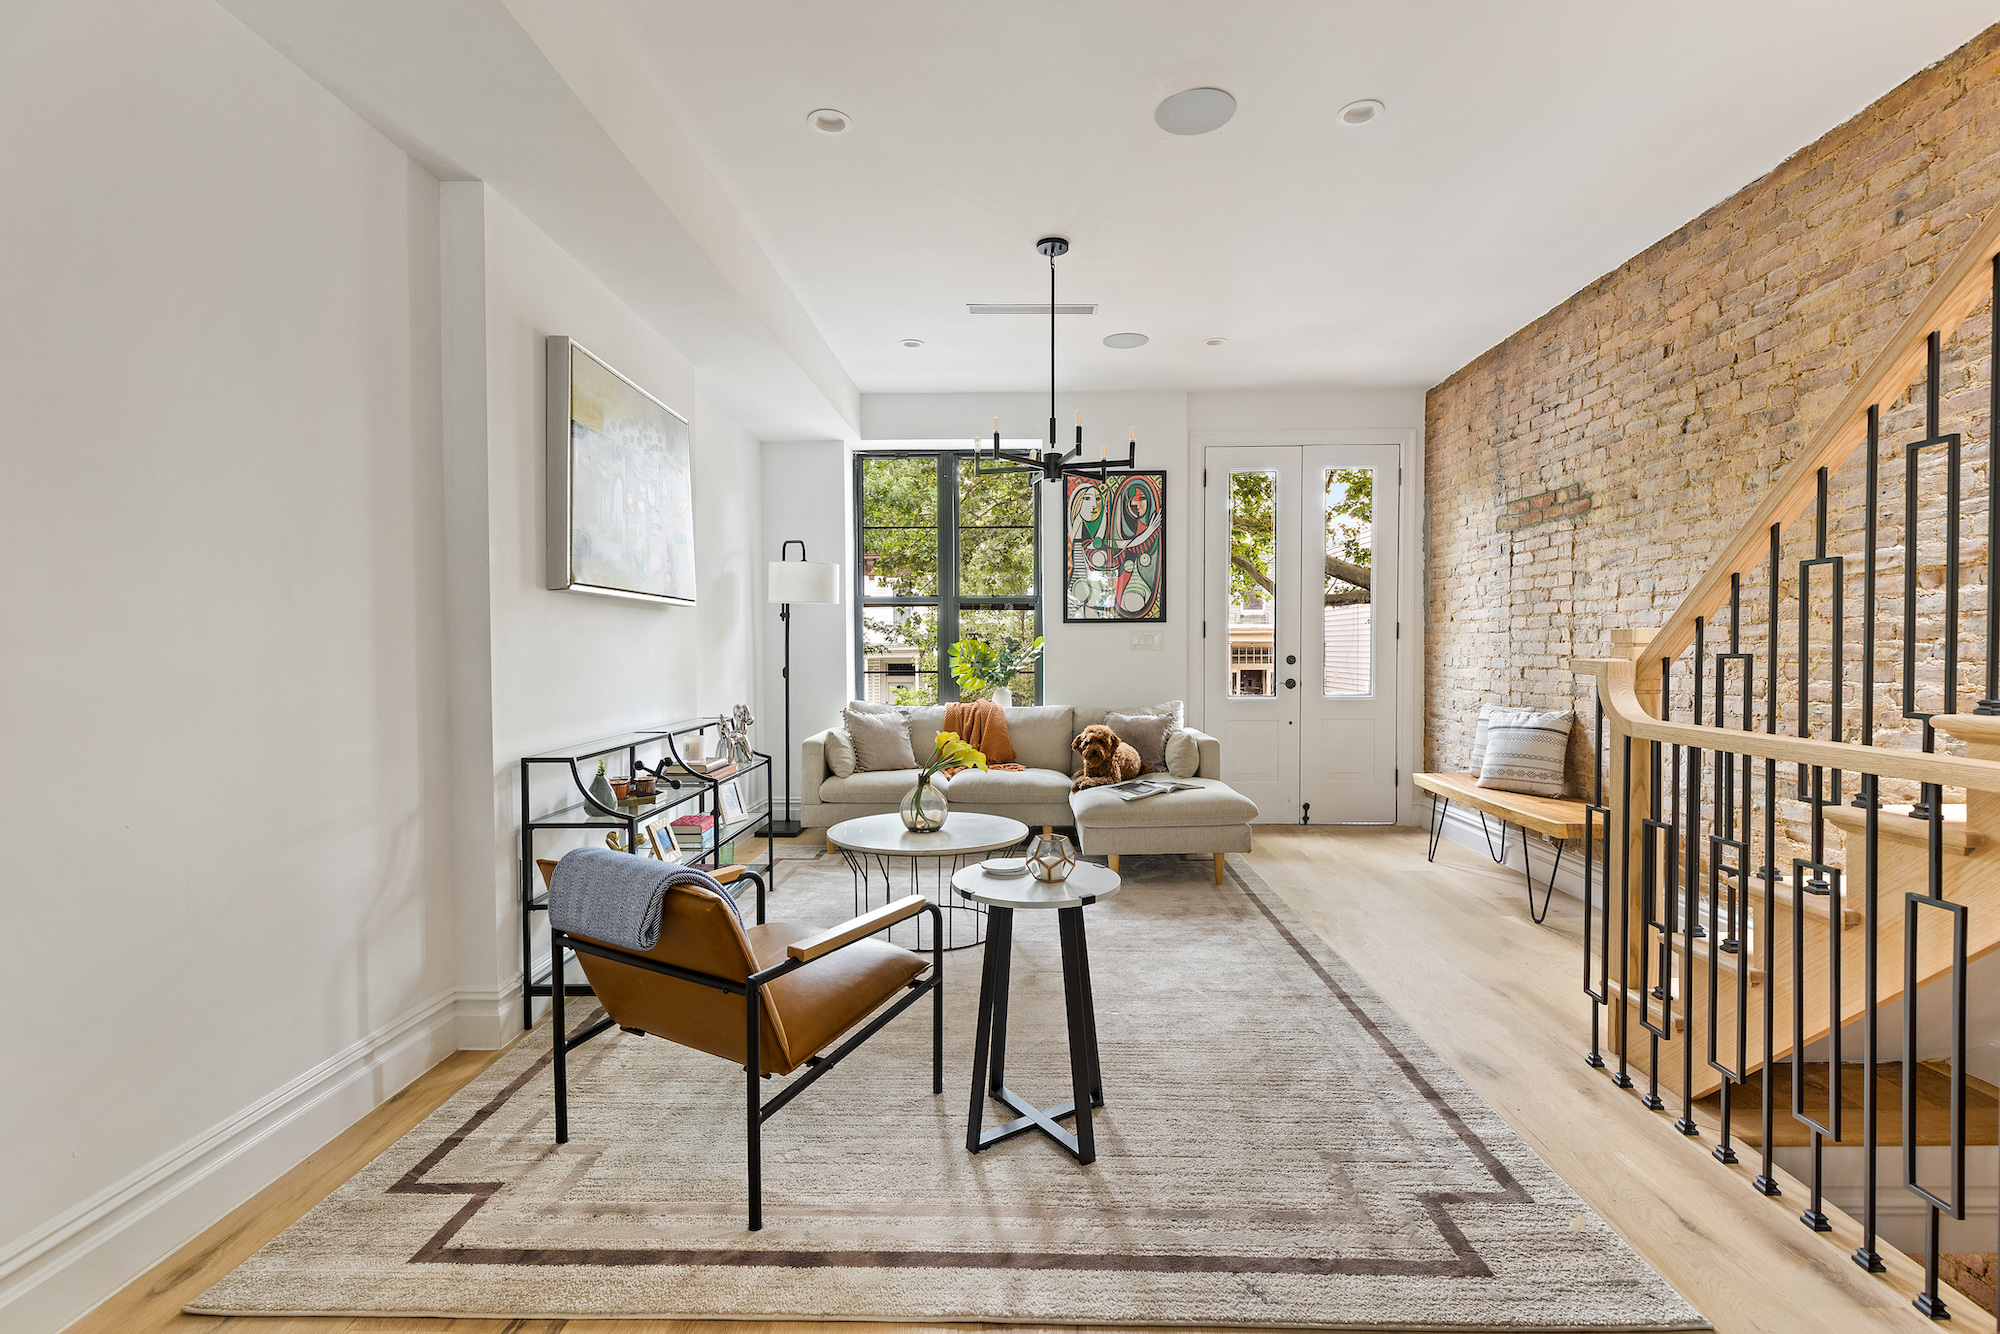 For $1.9M, this compact, renovated brick townhouse is a turn-key home in the heart of Stuyvesant Heights